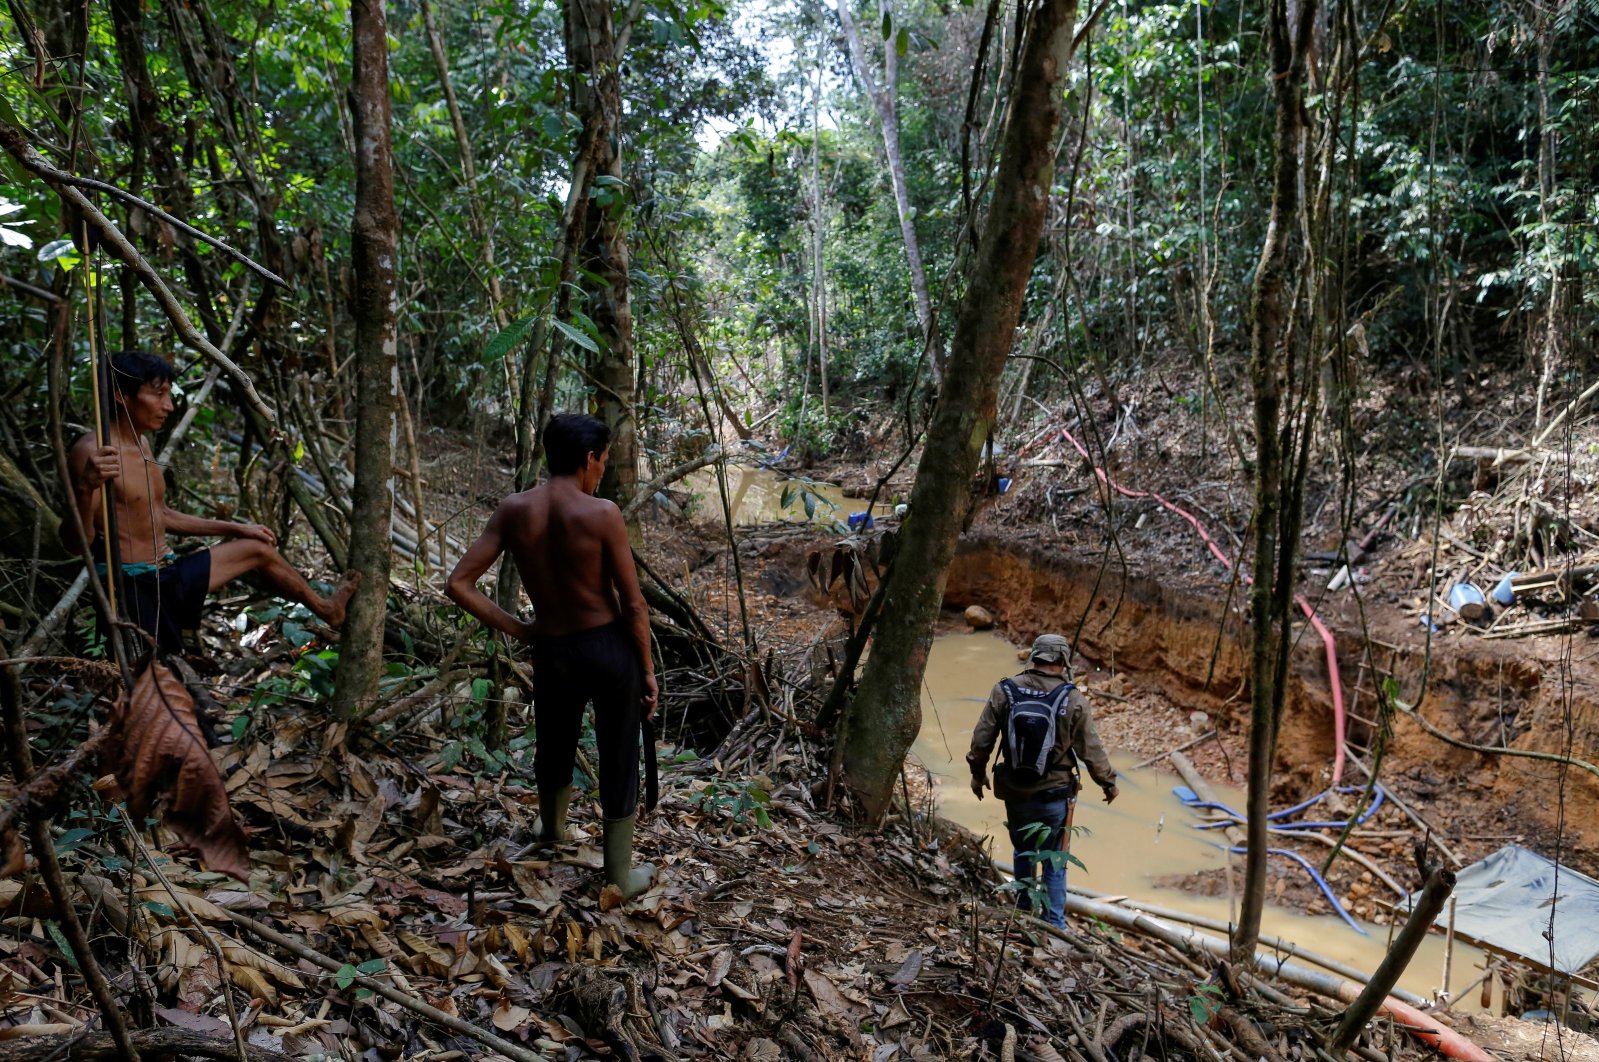 Yanomami Indians follow agents of Brazil's environmental agency in a gold mine during an operation against illegal gold mining on Indigenous land, in the heart of the Amazon rainforest, in Roraima state, Brazil, April 17, 2016. (Reuters Photo)